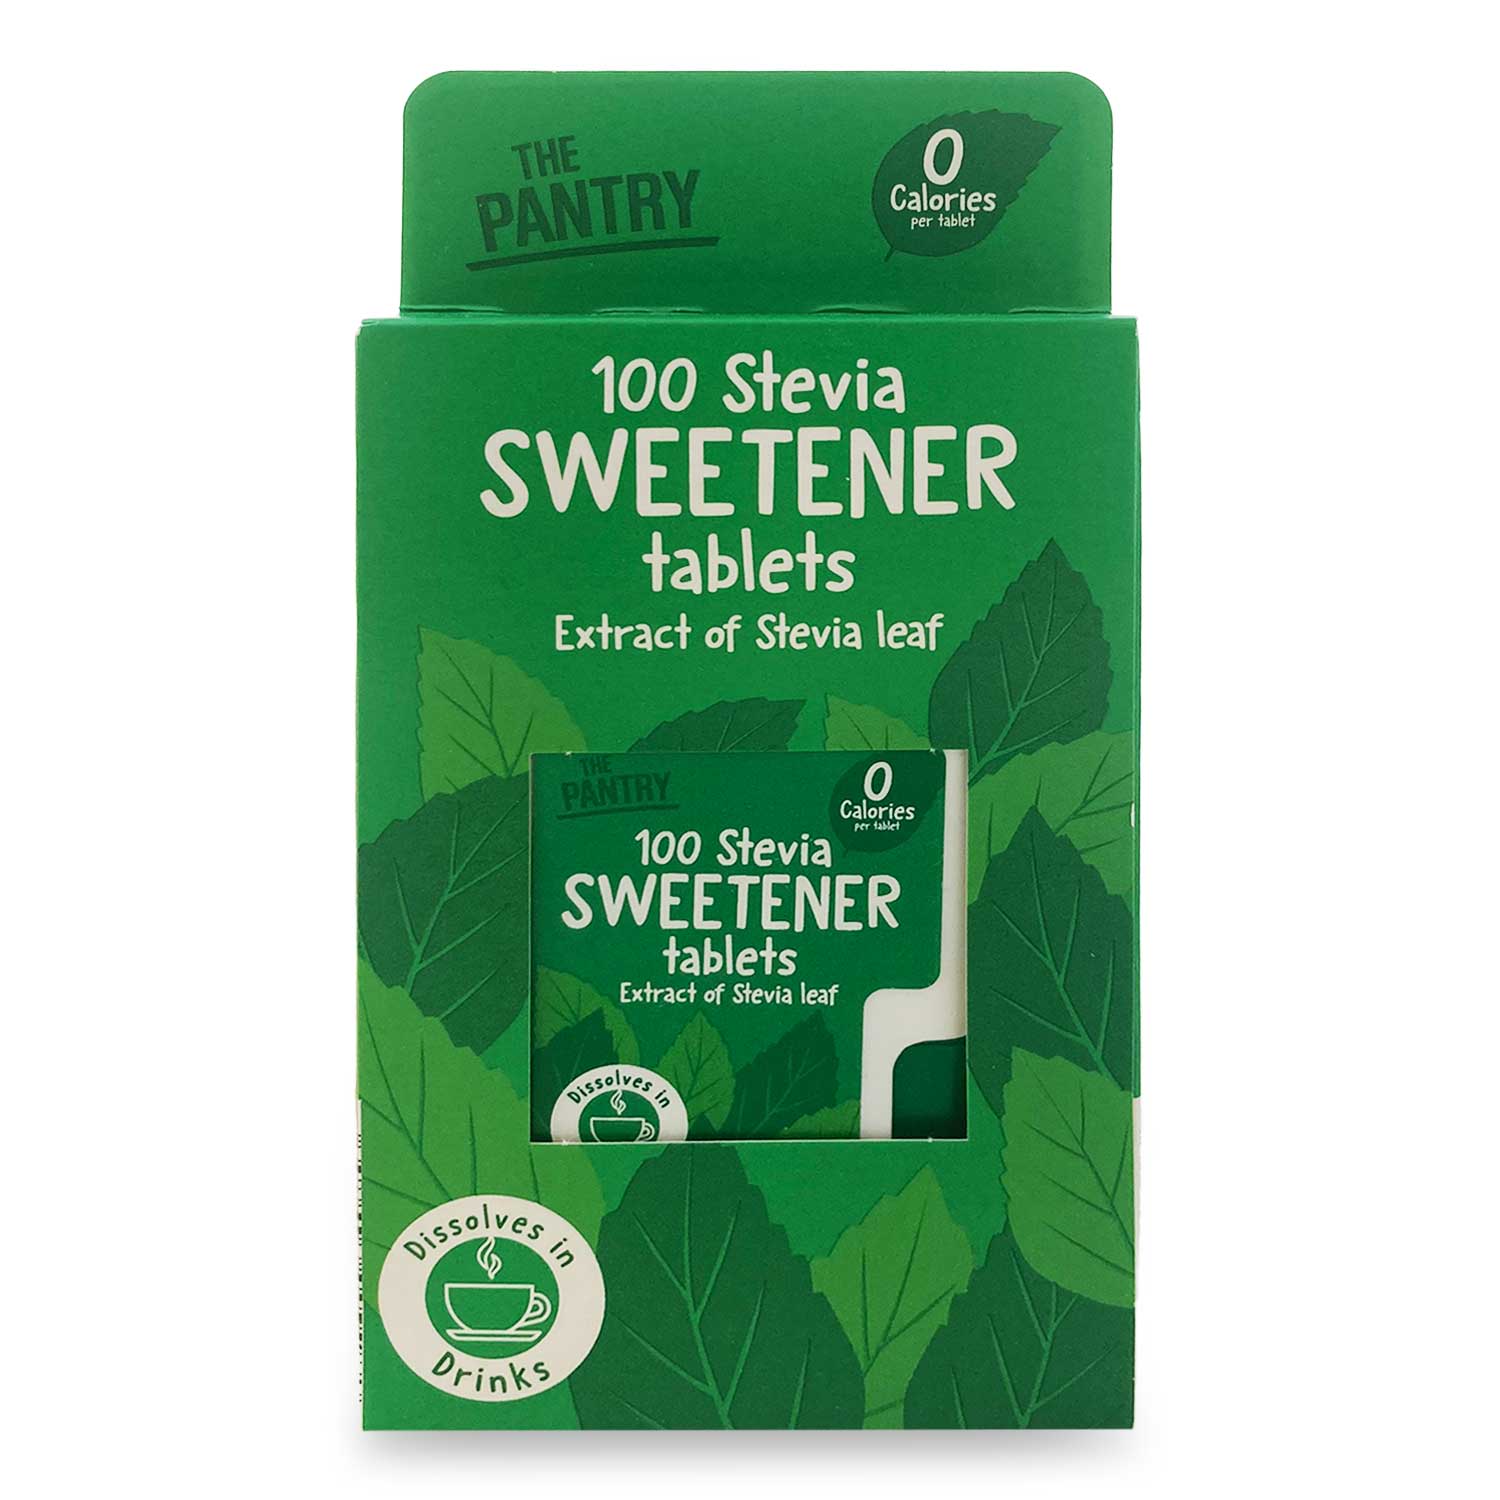 The Pantry Stevia Sweetener Tablets 100 Pack